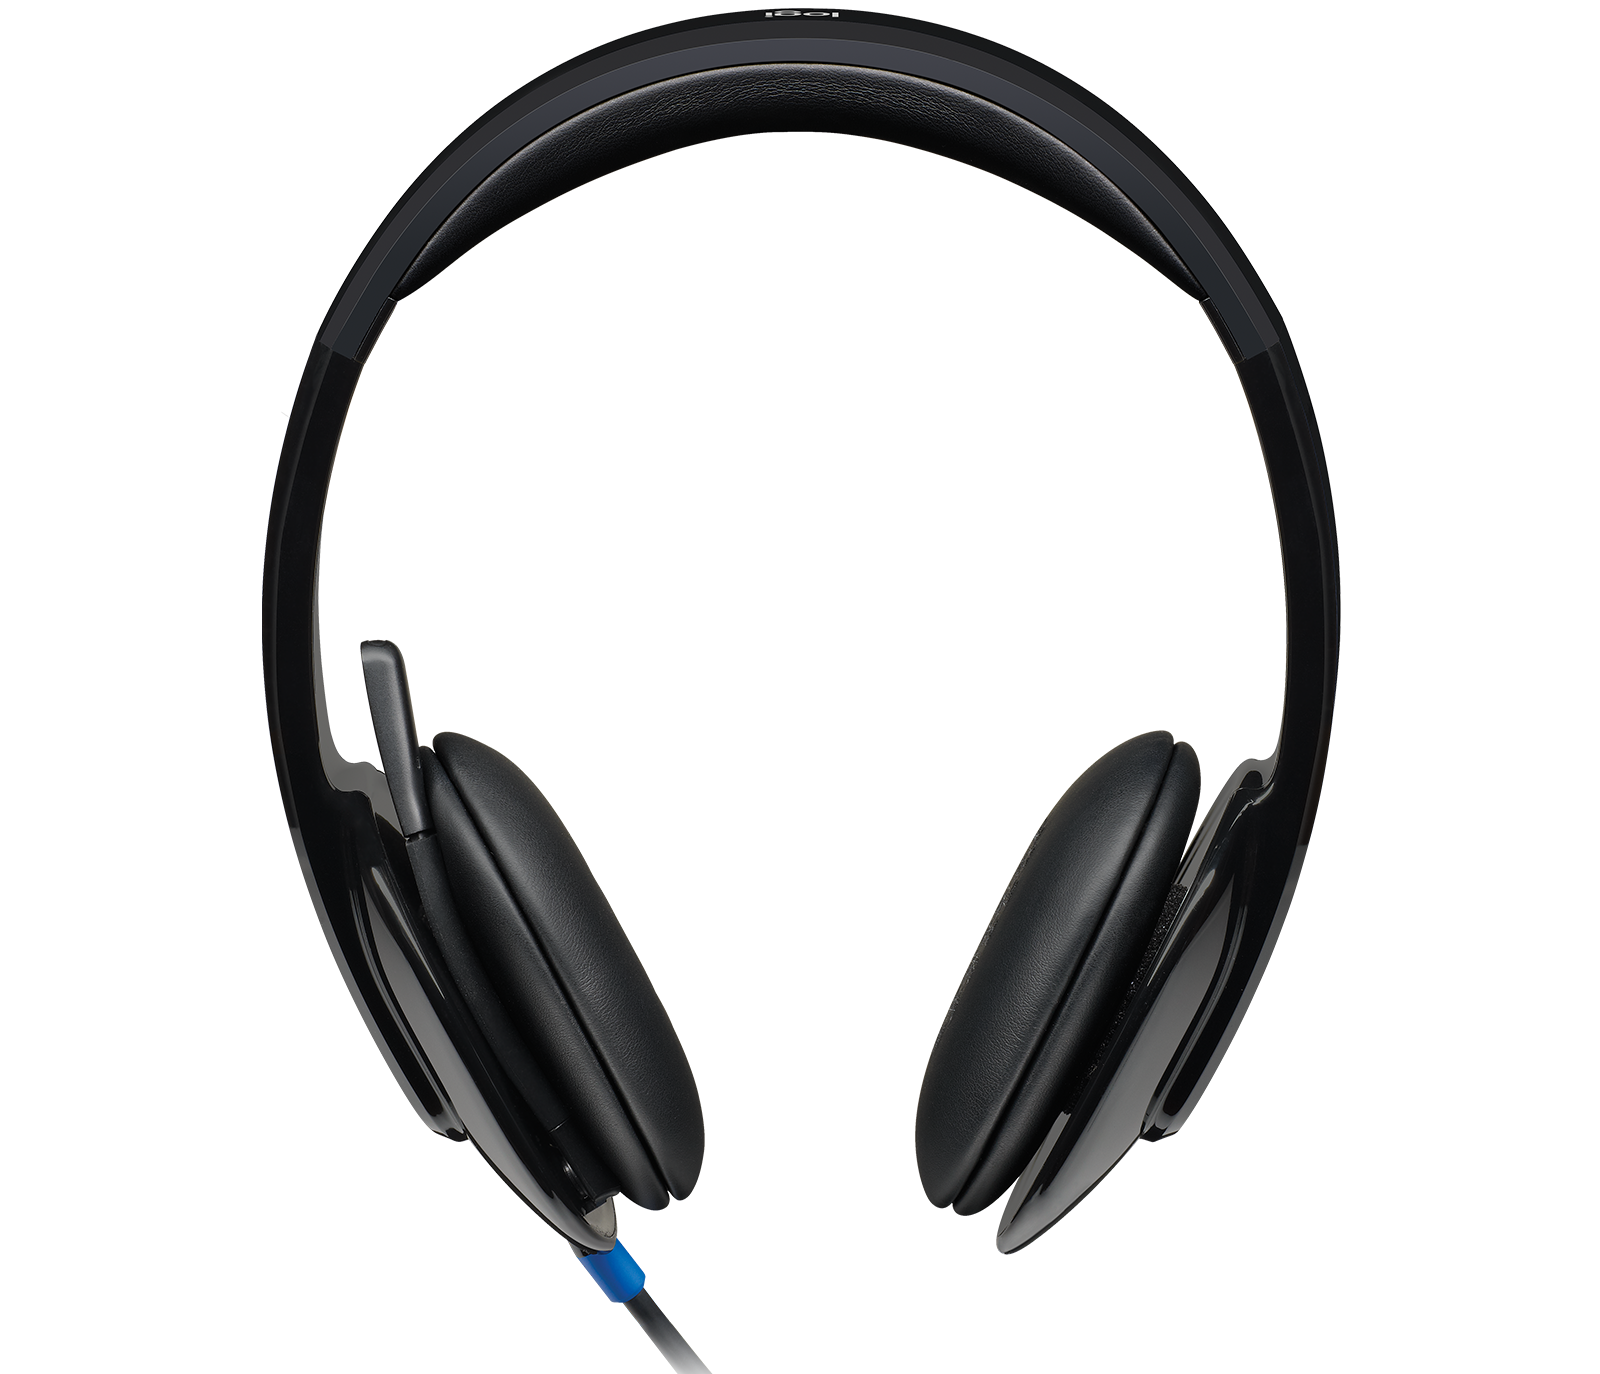 Image of H540 USB COMPUTER HEADSET With High-Definition sound and on-ear controls - Black